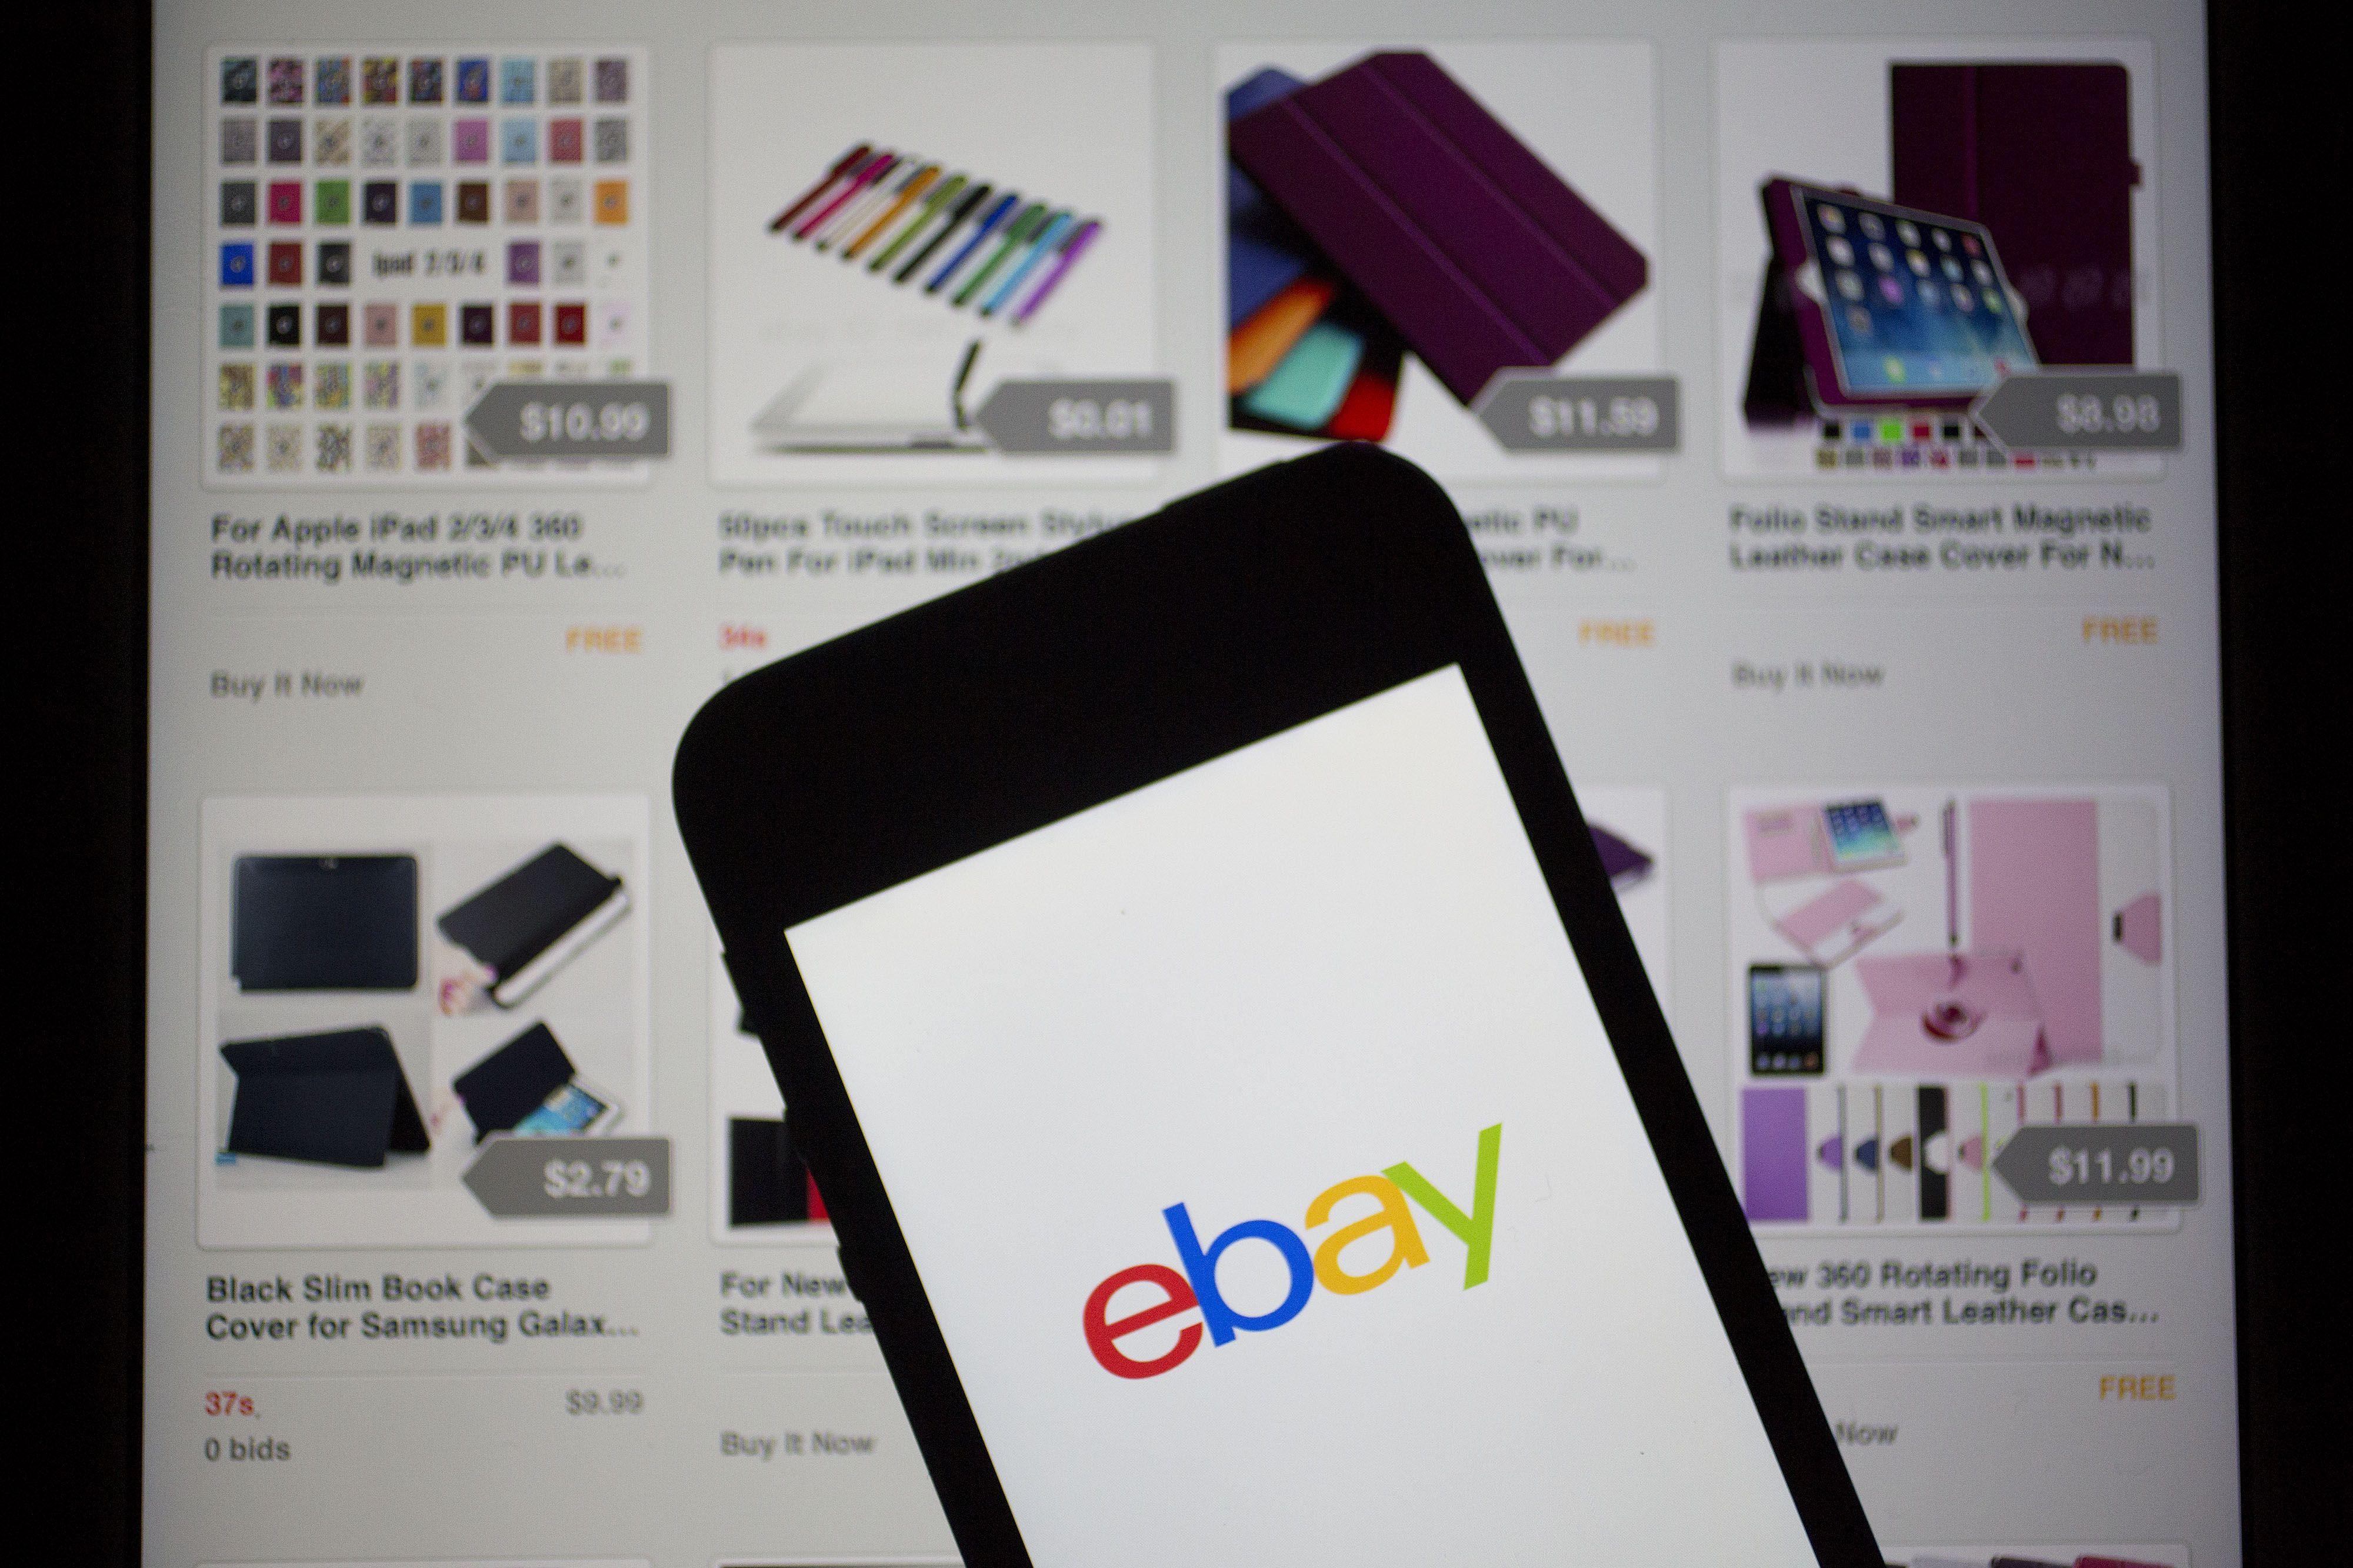 eBay Inc. Logo - Apple Is Selling Old iPhones for Cheap on eBay | Time